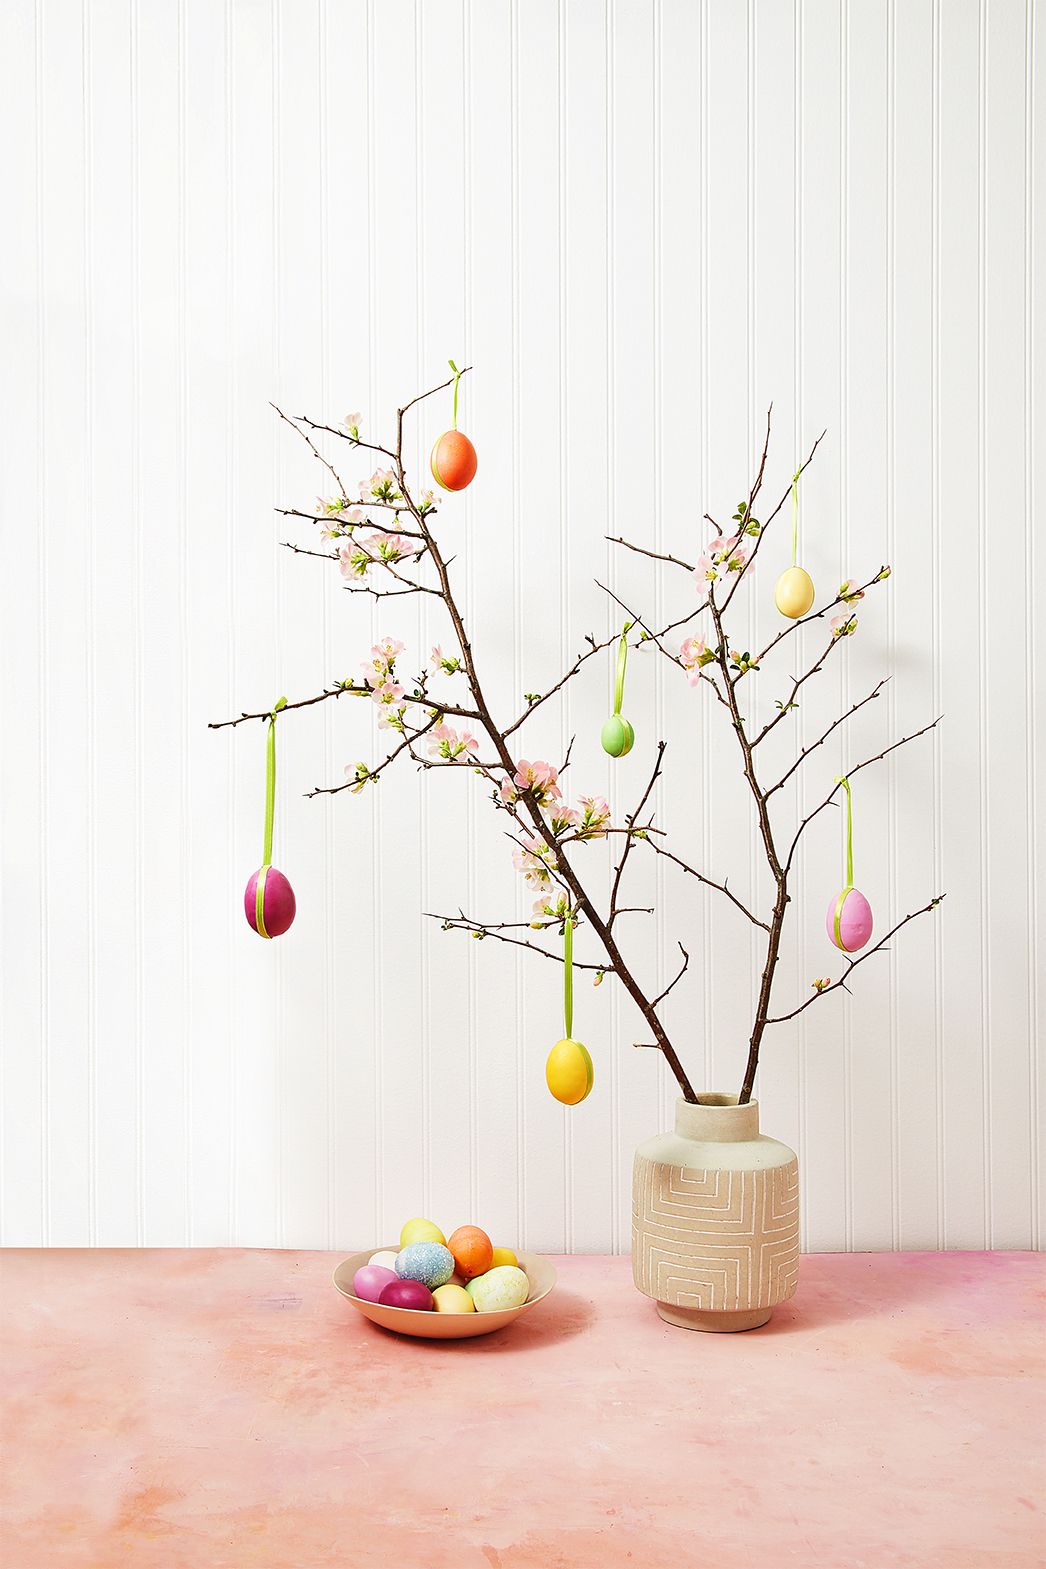 15 DIY Easter Tree Ideas - How to Make An Easter Tree at Home